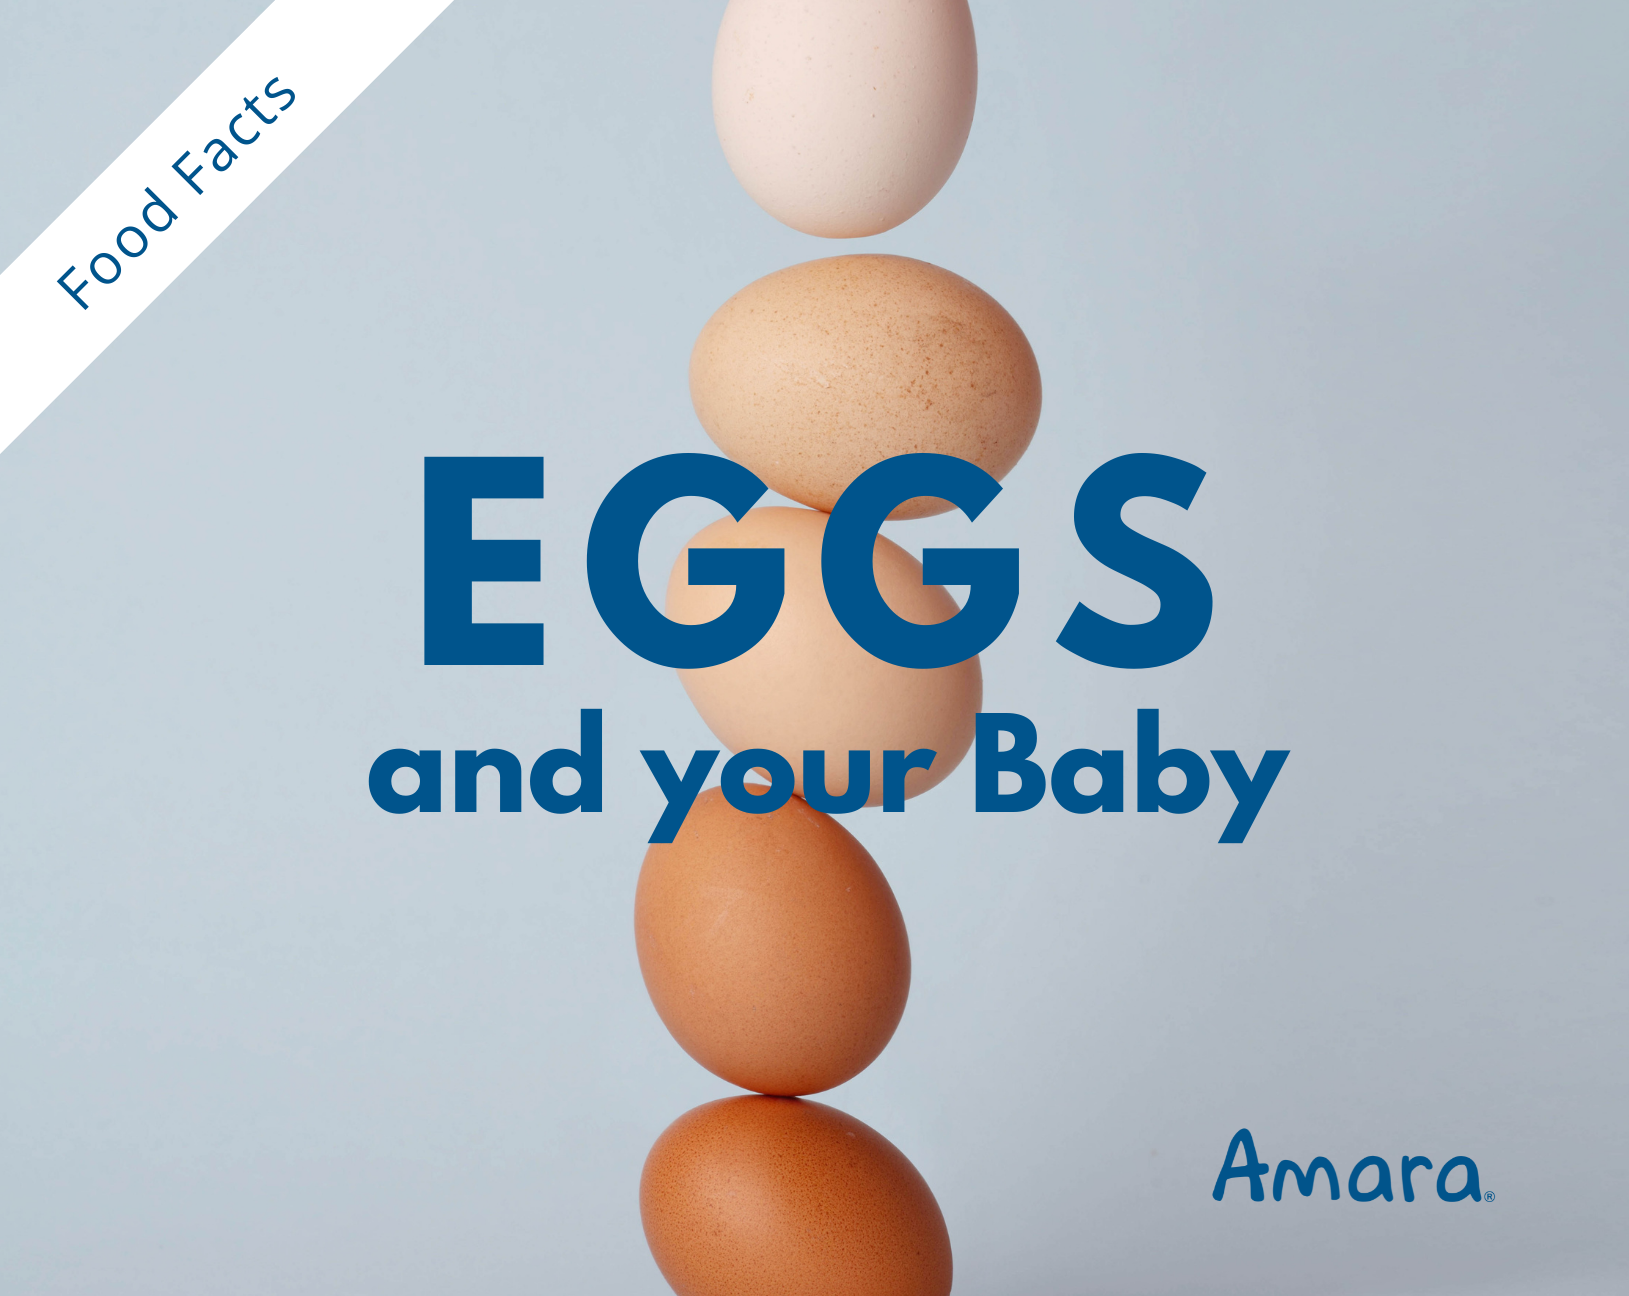 eggs and your baby toddler